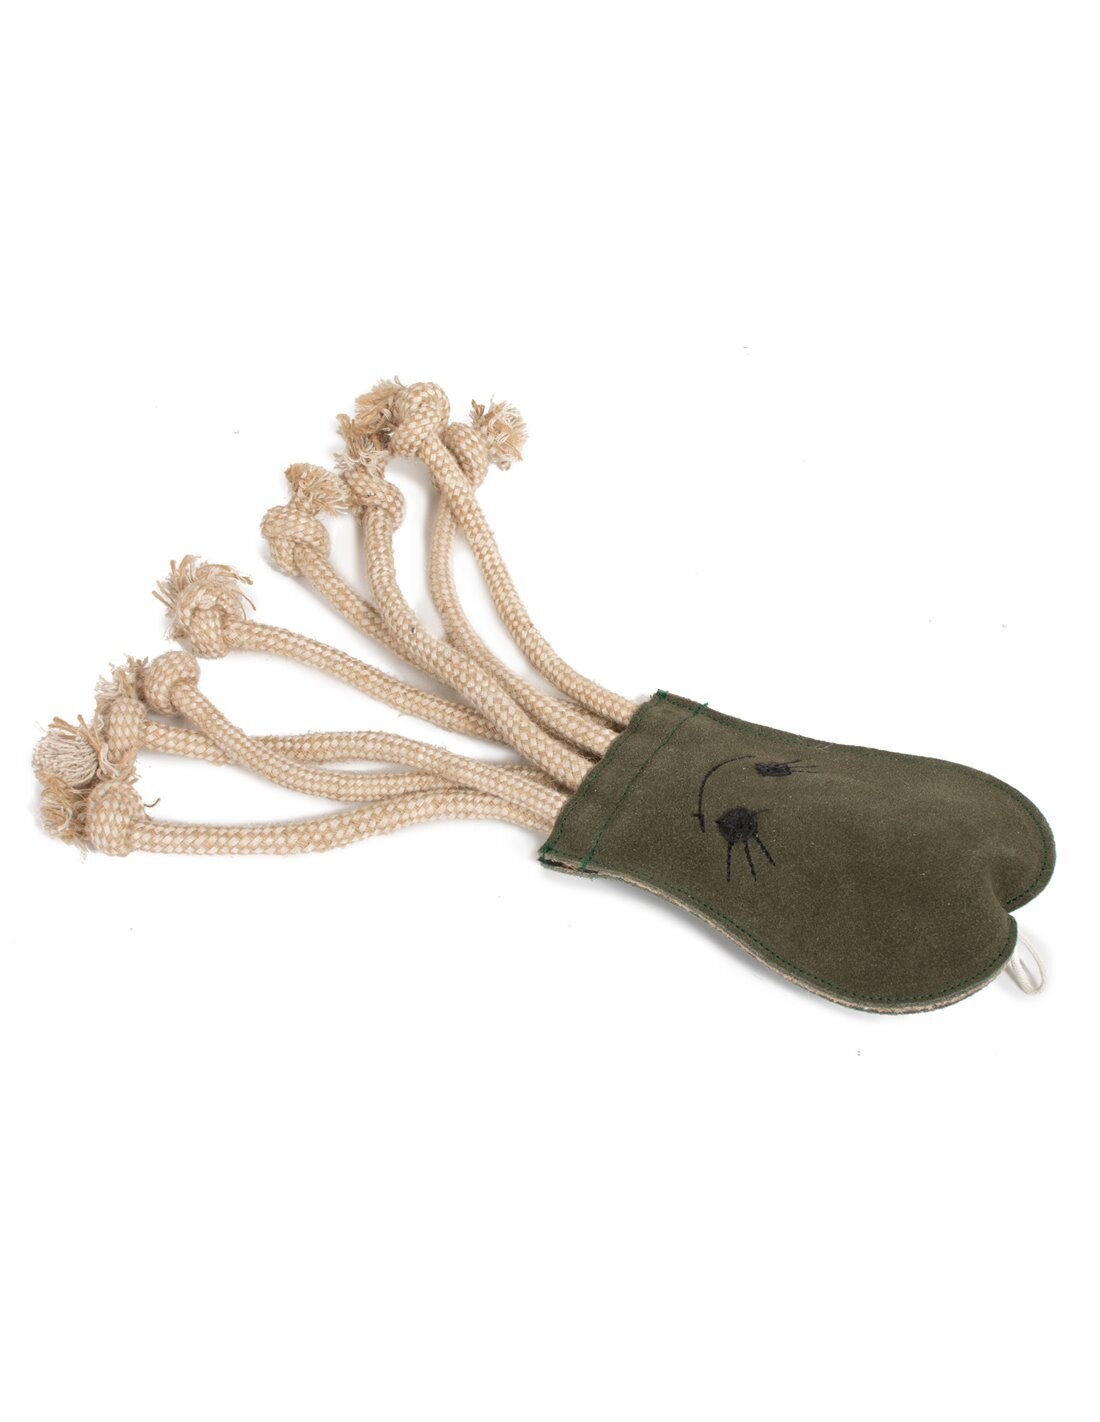 Octopus Natural Toys pack of 6 - Stock